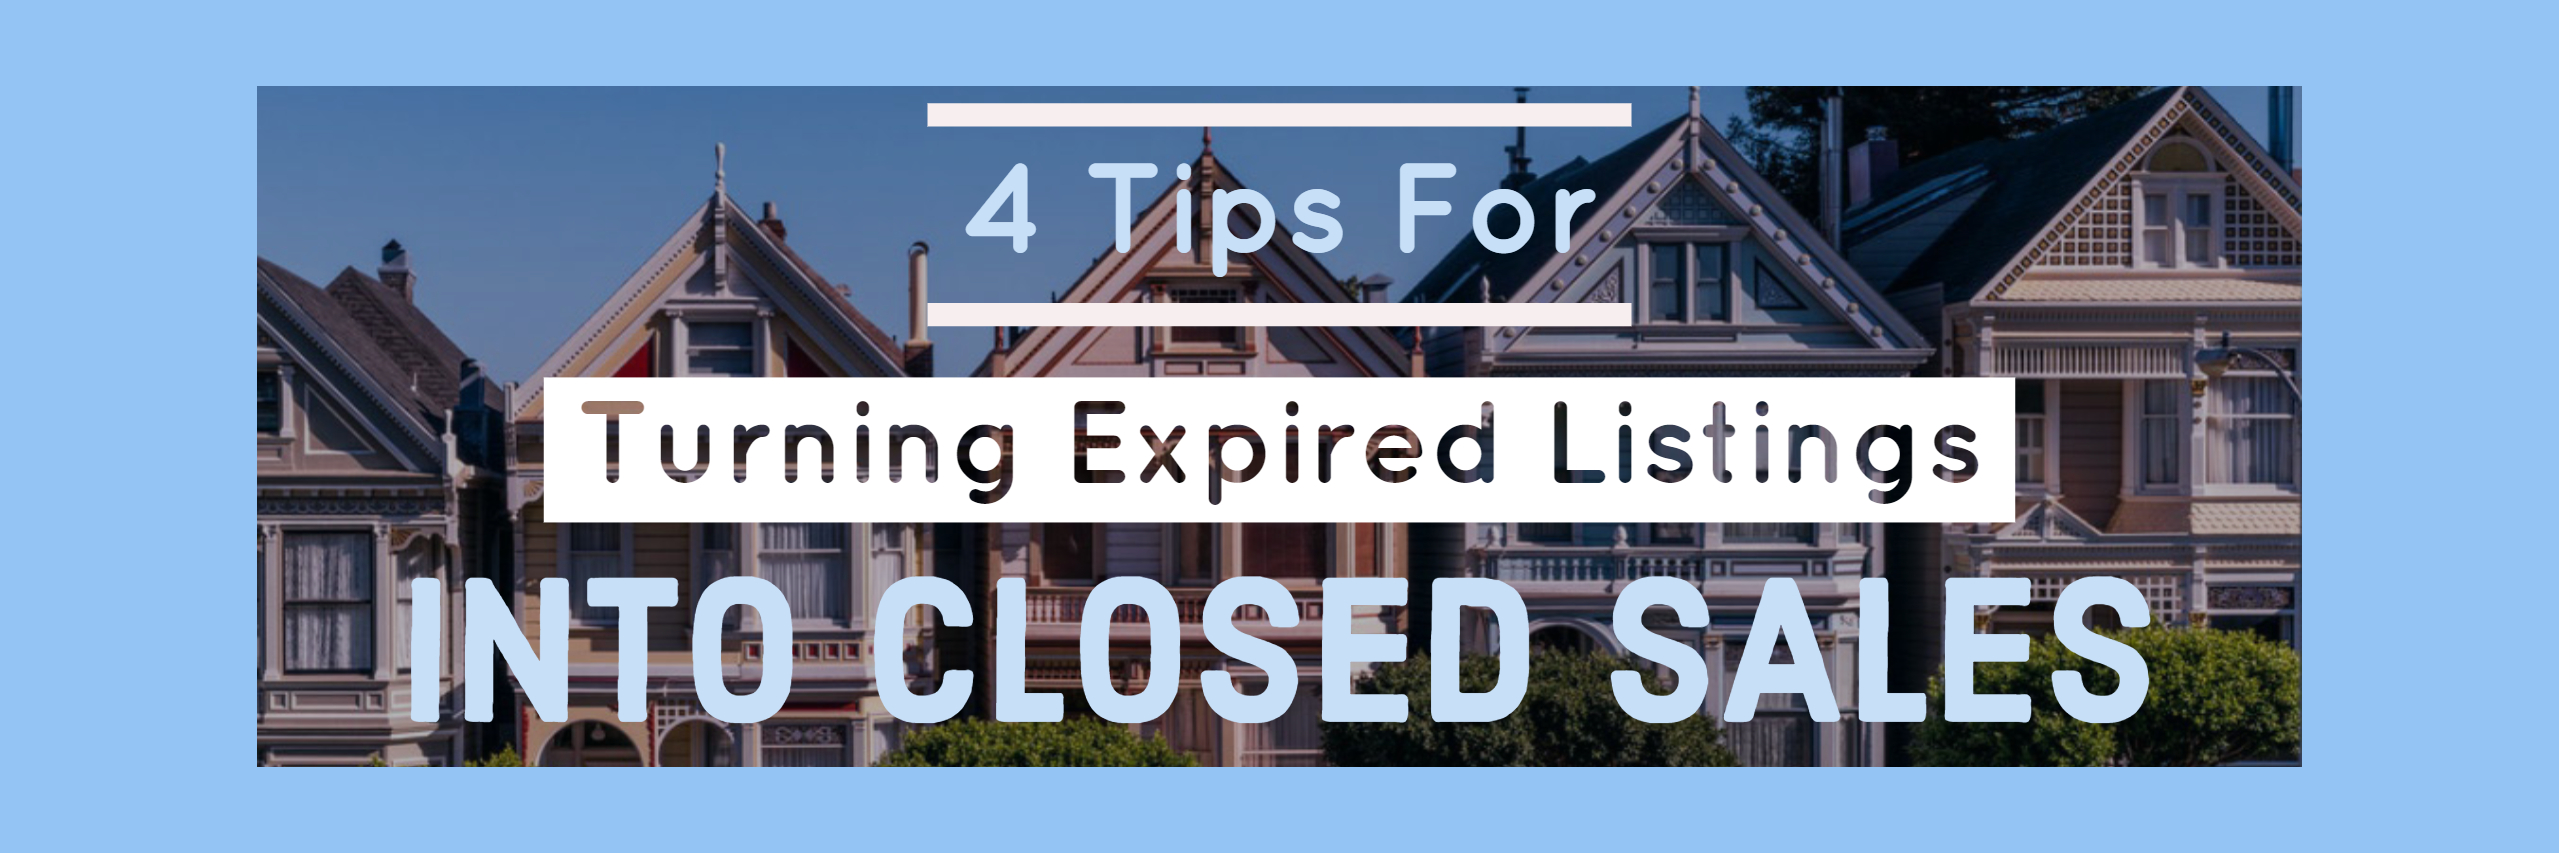 4 Tips for Turning Expired Listings into Closed Sales